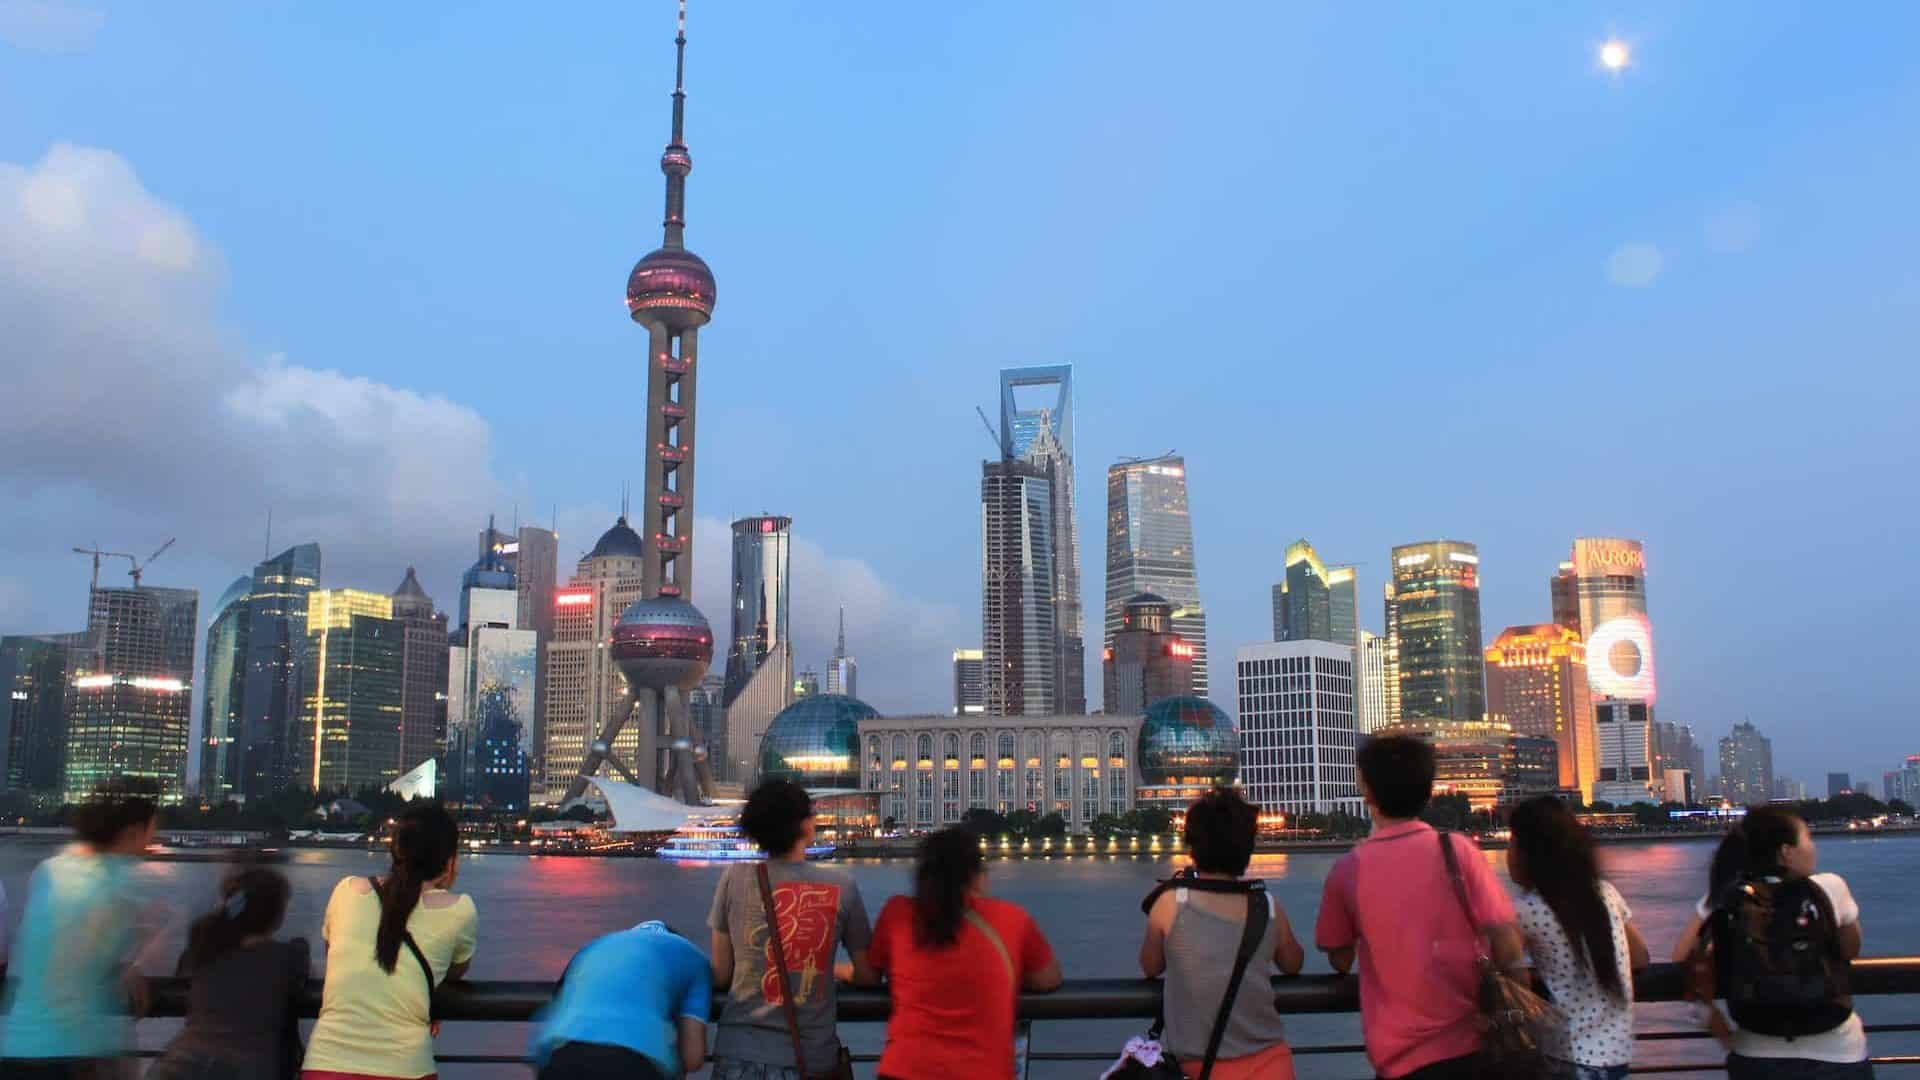 The Bund offers the best views of the Pudong district